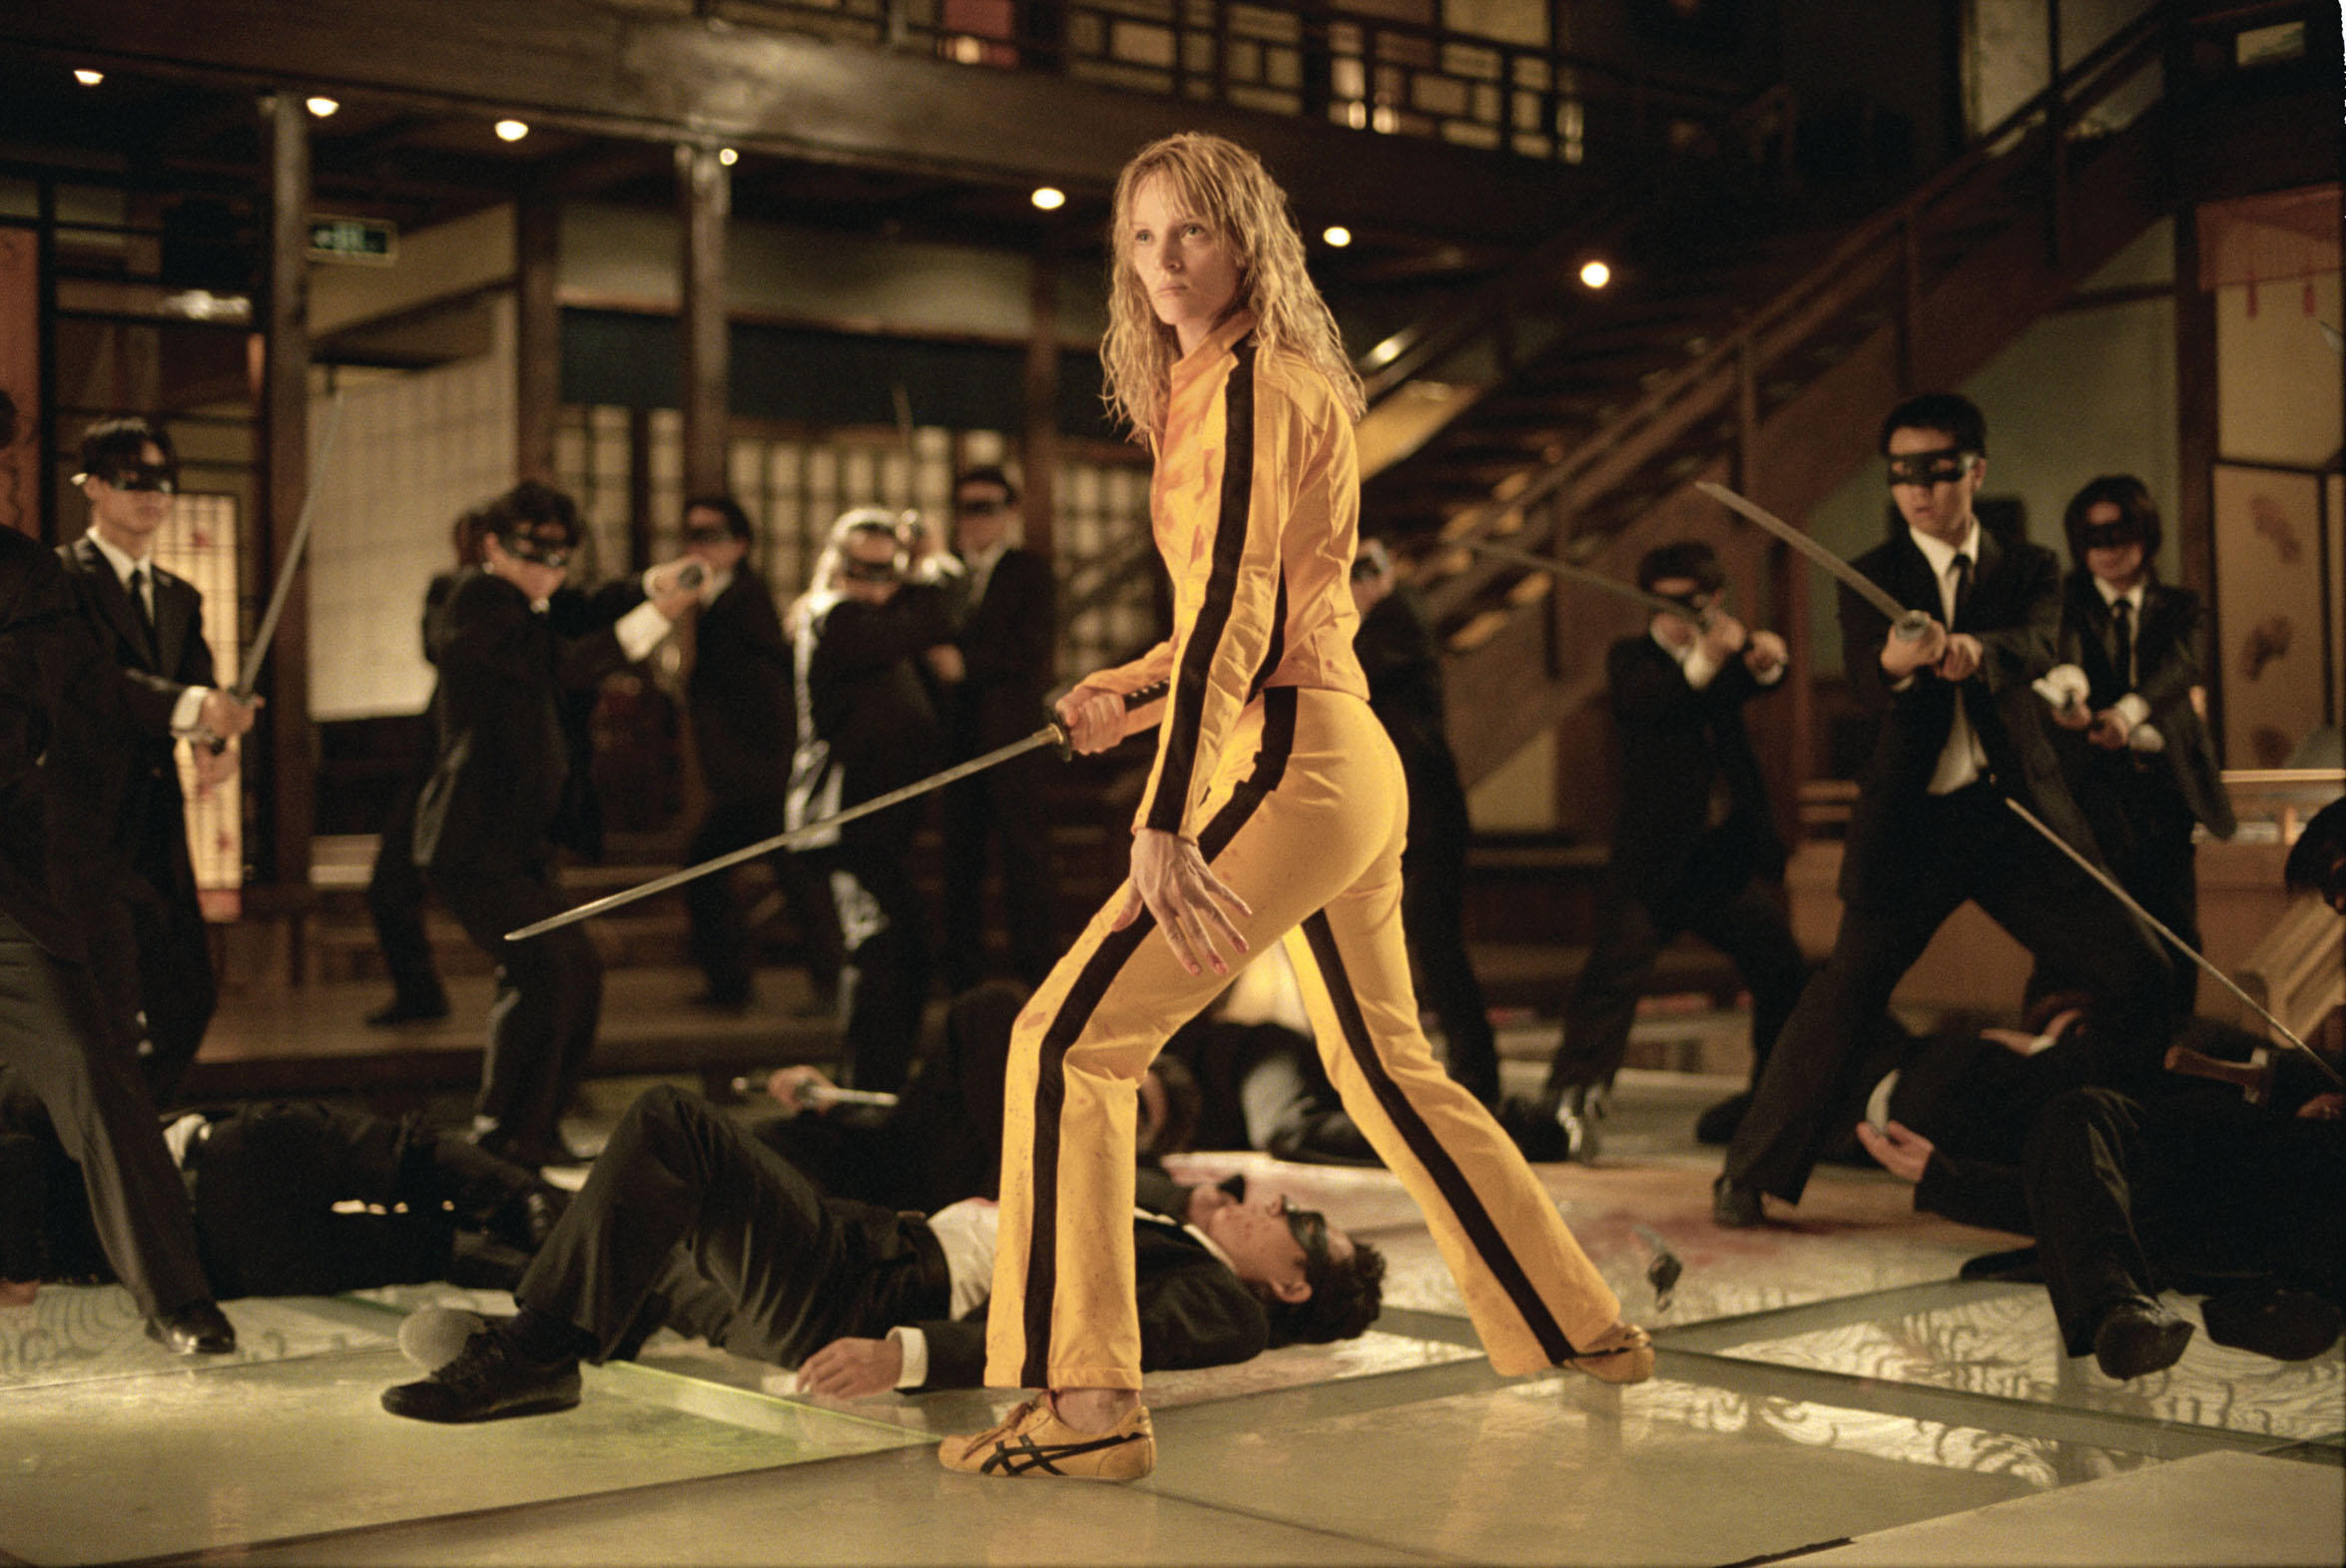 Uma Thurman as The Bride, in a yellow jumpsuit and holding a sword, is surrounded by the Crazy 88 Yakuzas in Kill Bill Vol. 1